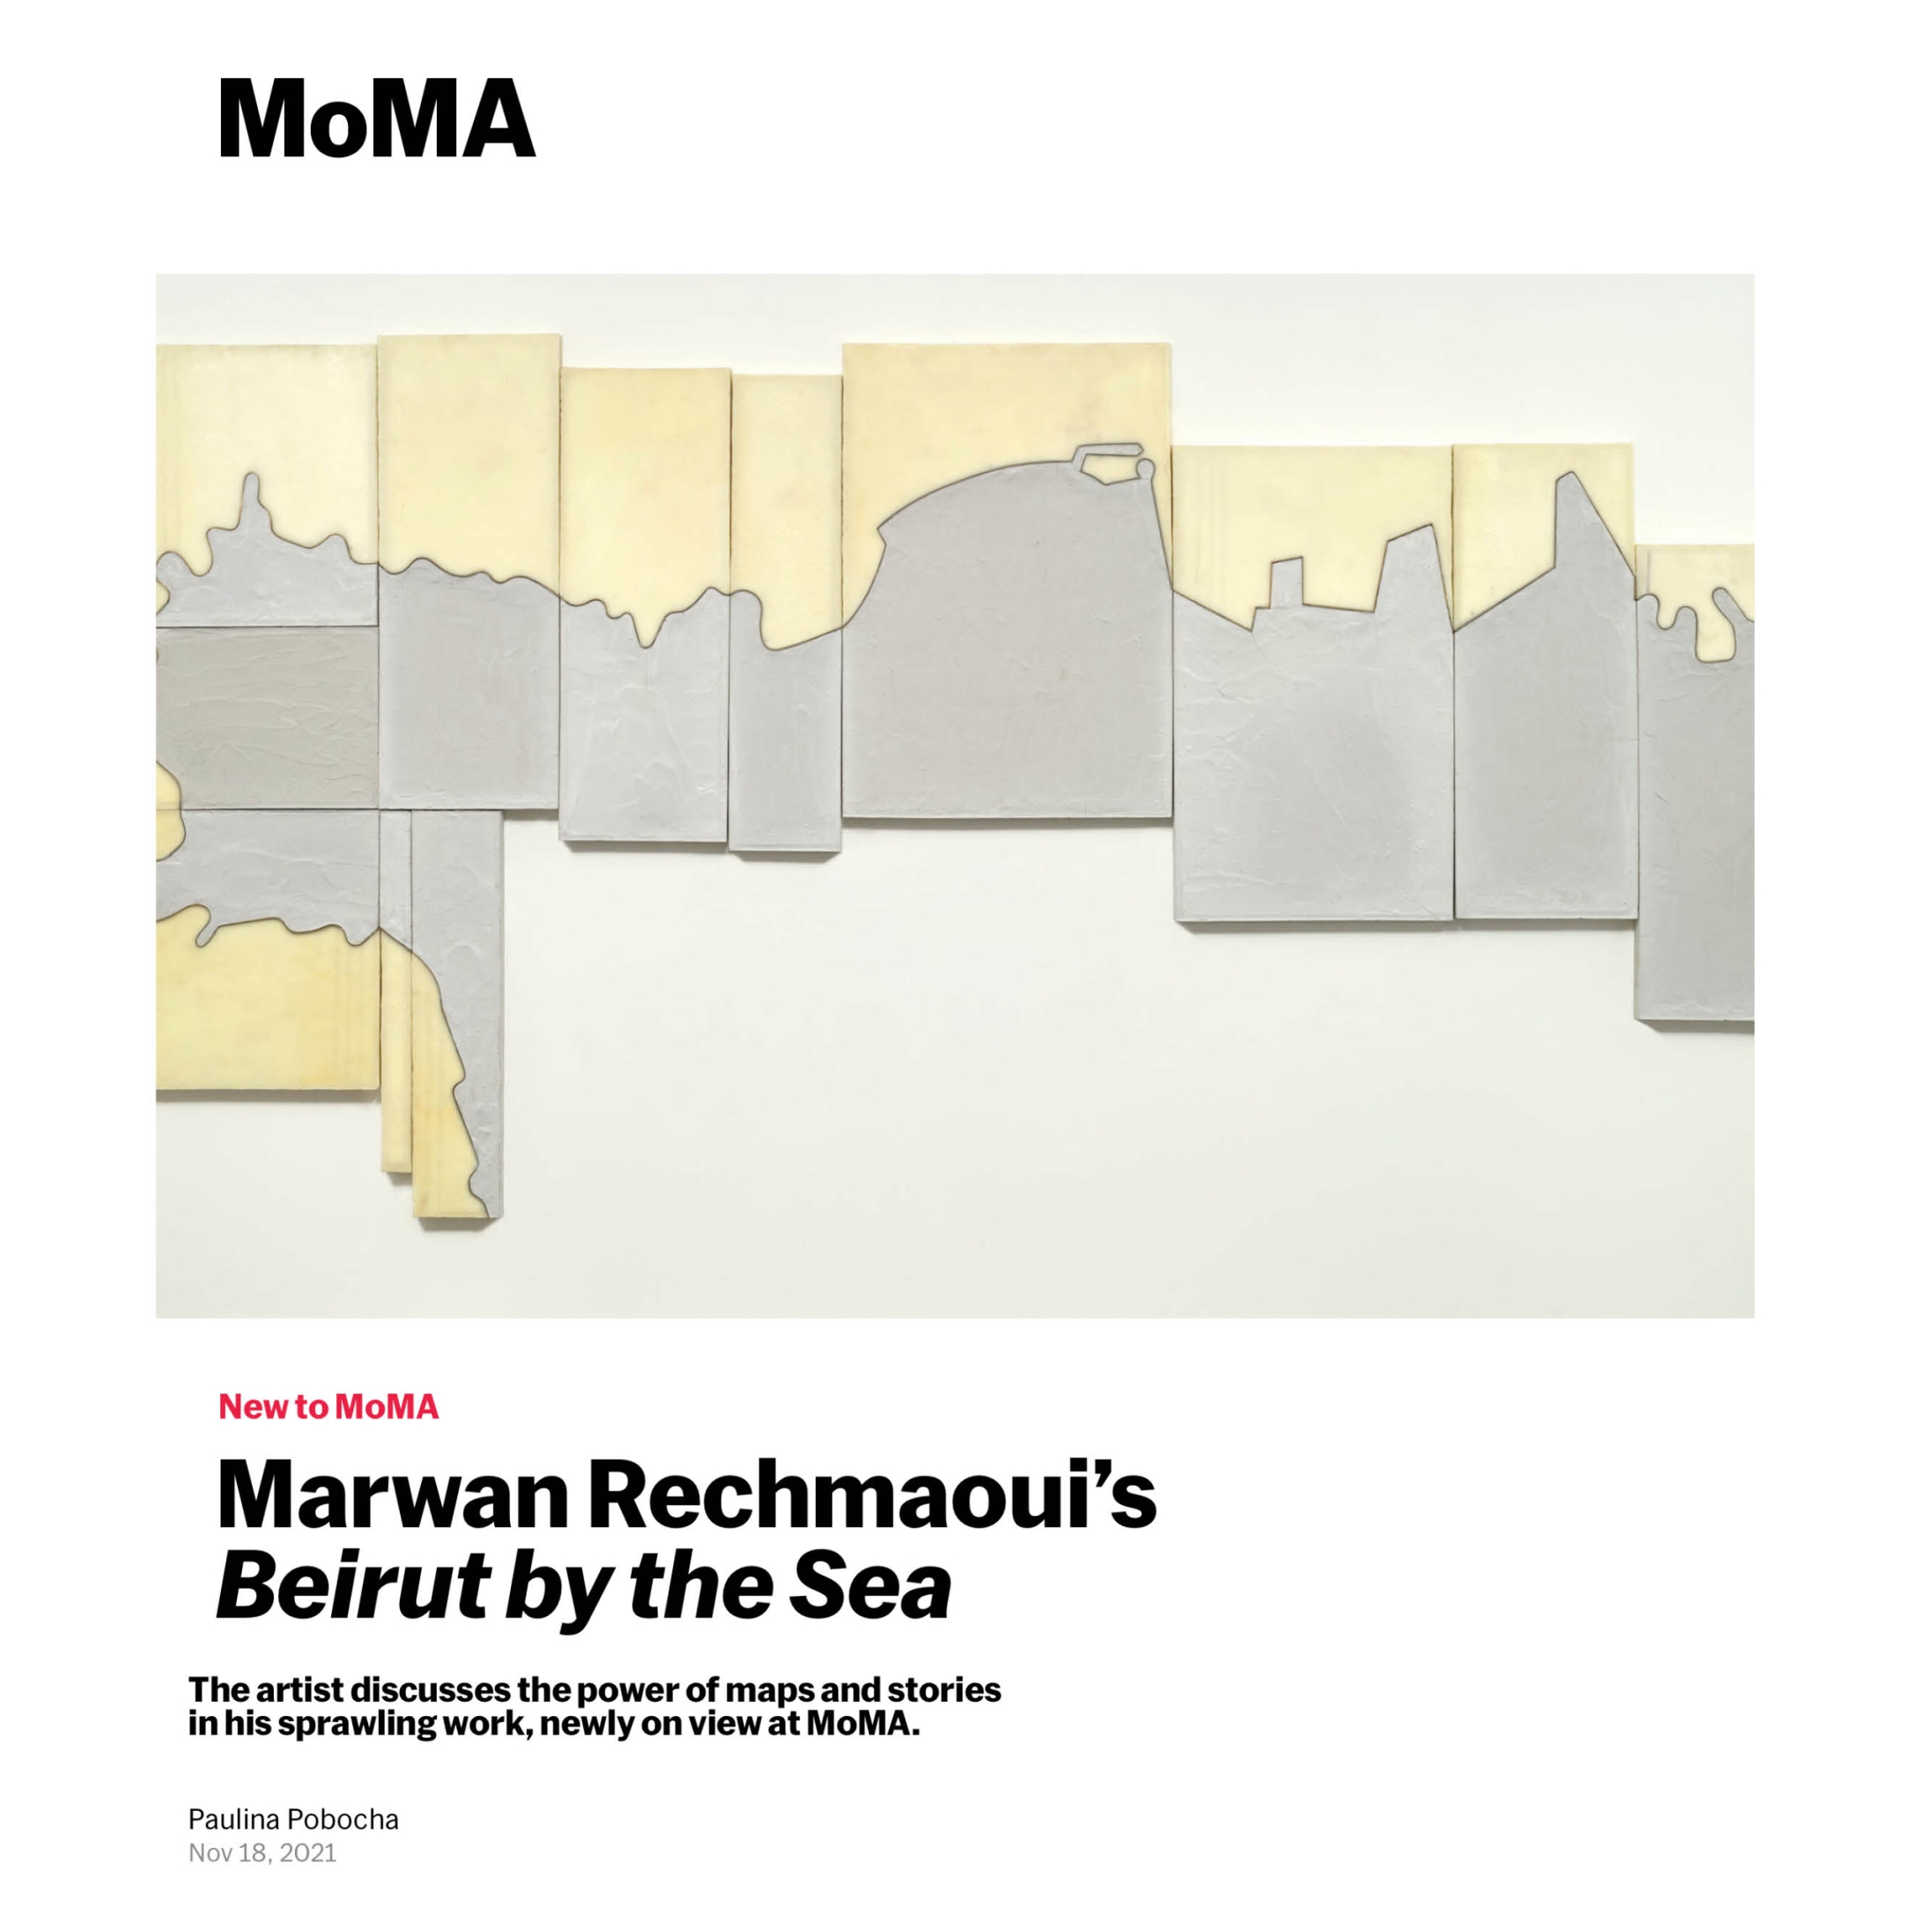 "New to MoMA: Marwan Rechmaoui’s Beirut by the Sea" | Interview with Marwan Rechmaoui by Paulina Pobocha, November 18, 2021